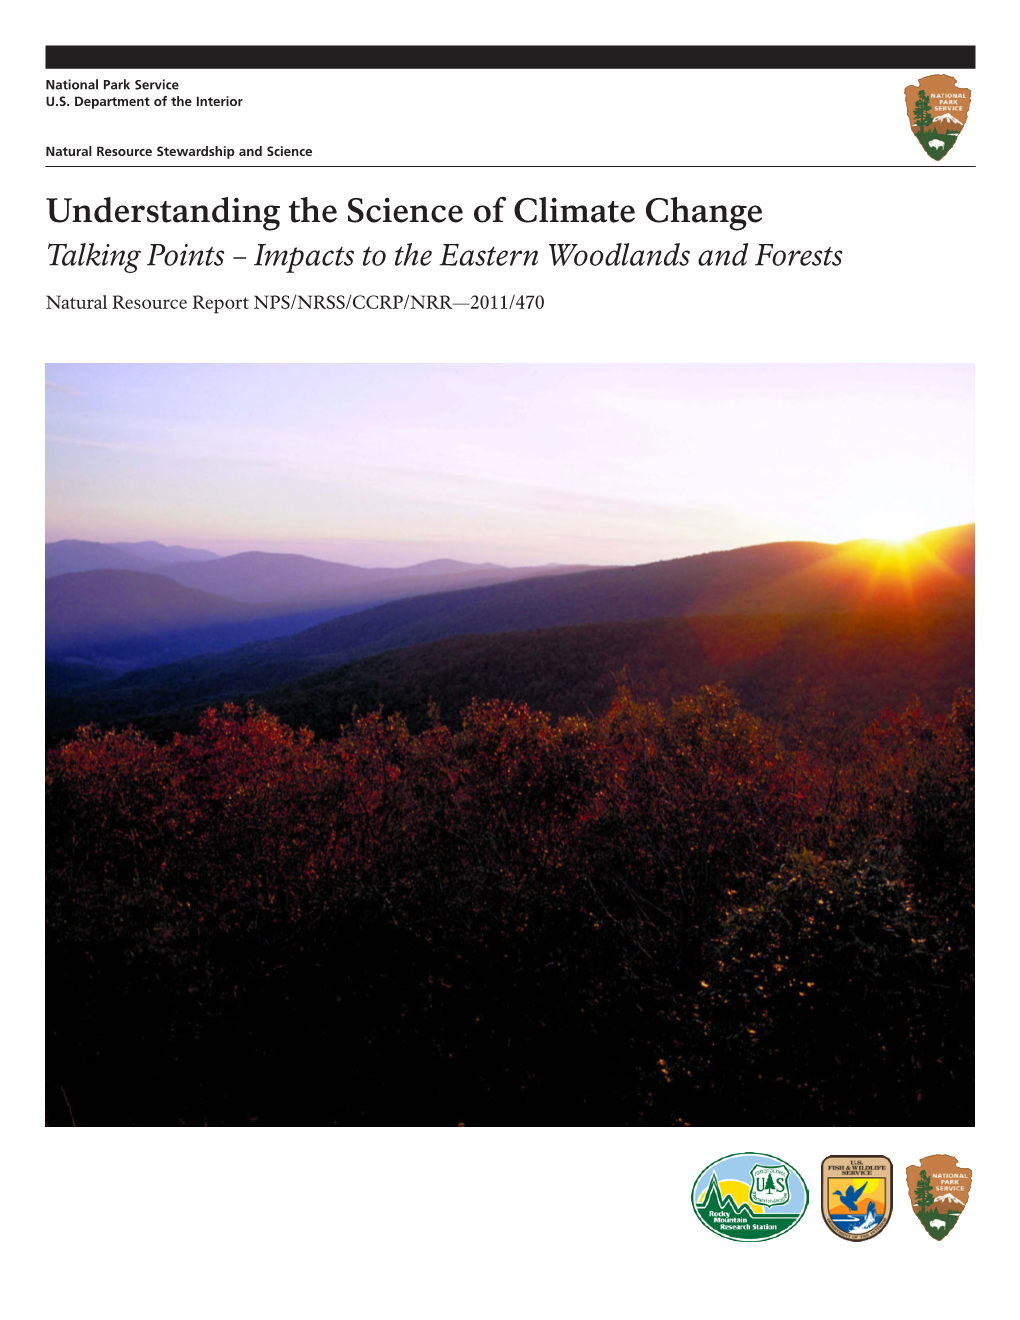 Understanding the Science of Climate Change Talking Points – Impacts to the Eastern Woodlands and Forests